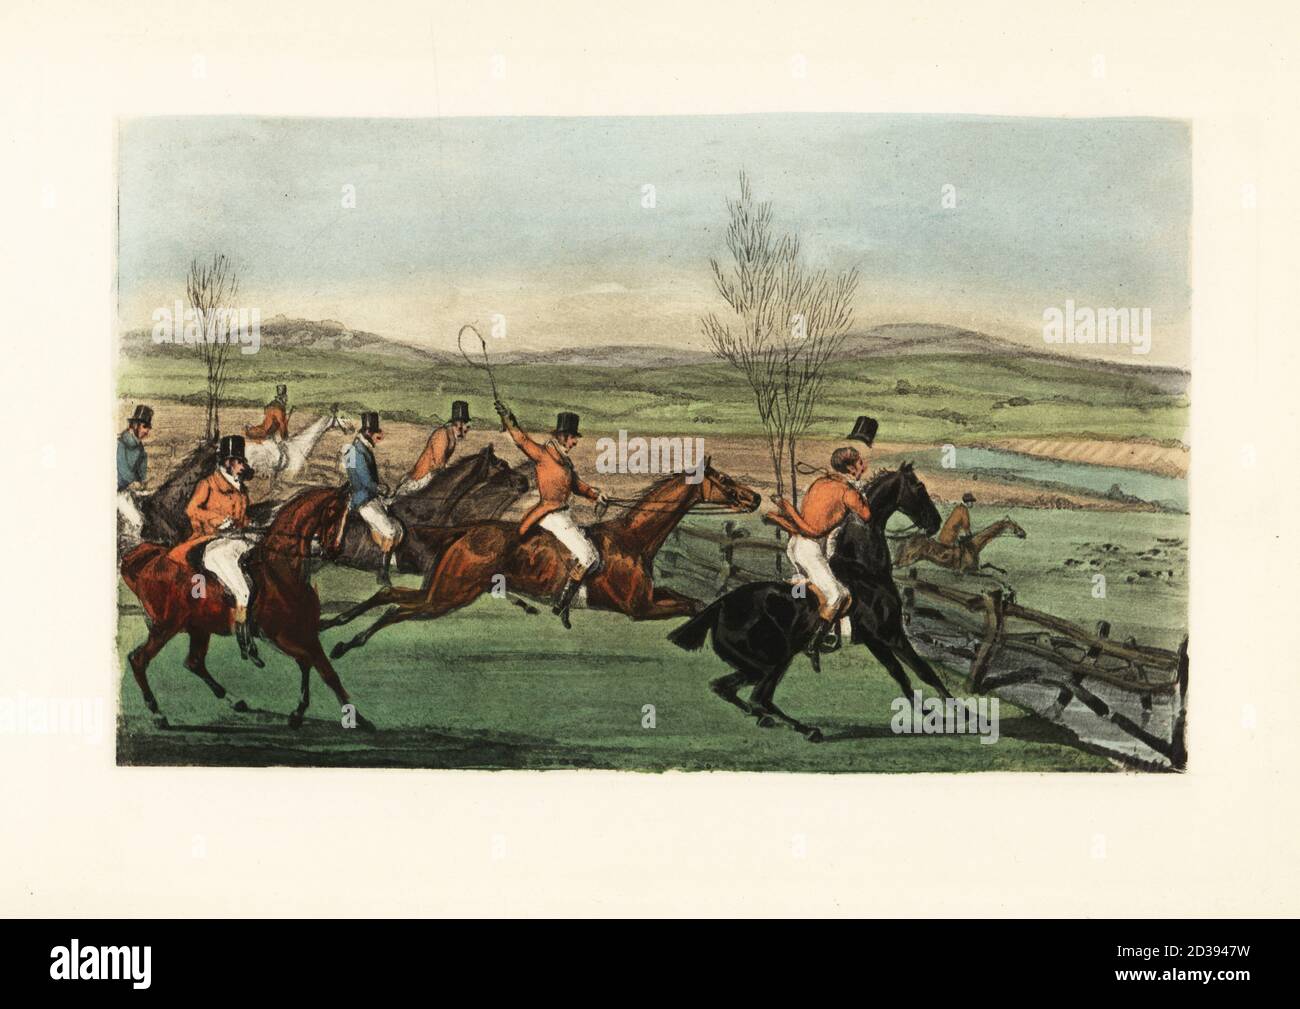 English gentleman falling at a ha-ha or sunken fence during a fox hunt. Mytton fell and was injured at a ha-ha on Shavington Day, 7 April 1829. Now for the honour of Shropshire! The Shavington Day; a trial of rival packs and consequently of rival horsemen. Chromolithographic facsimile of an illustration by Henry Thomas Alken from Memoirs of the Life of the Late John Mytton by Nimrod aka Charles James Apperley, Kegan Paul, London, 1900. Stock Photo